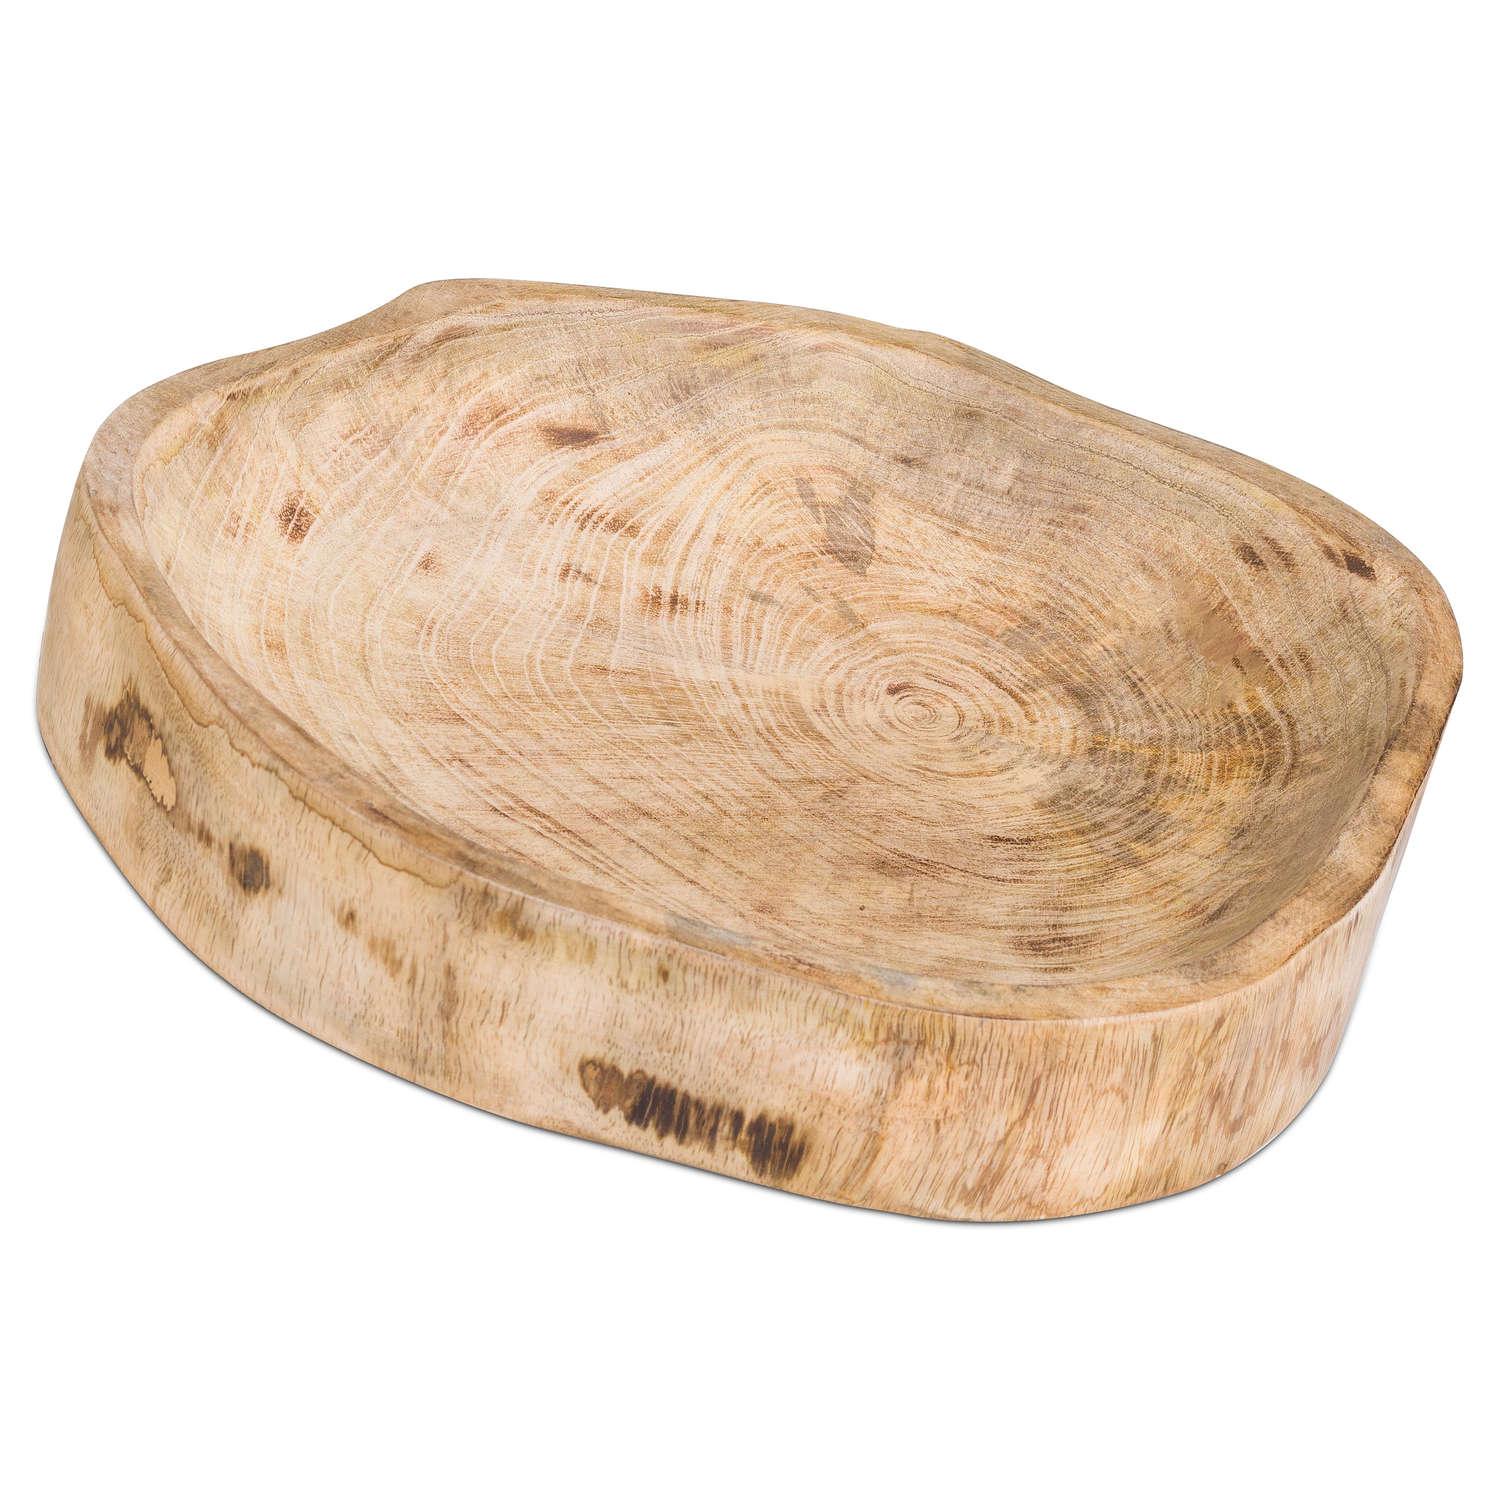 Hand Crafted Mango Wood Bowl - Vookoo Lifestyle